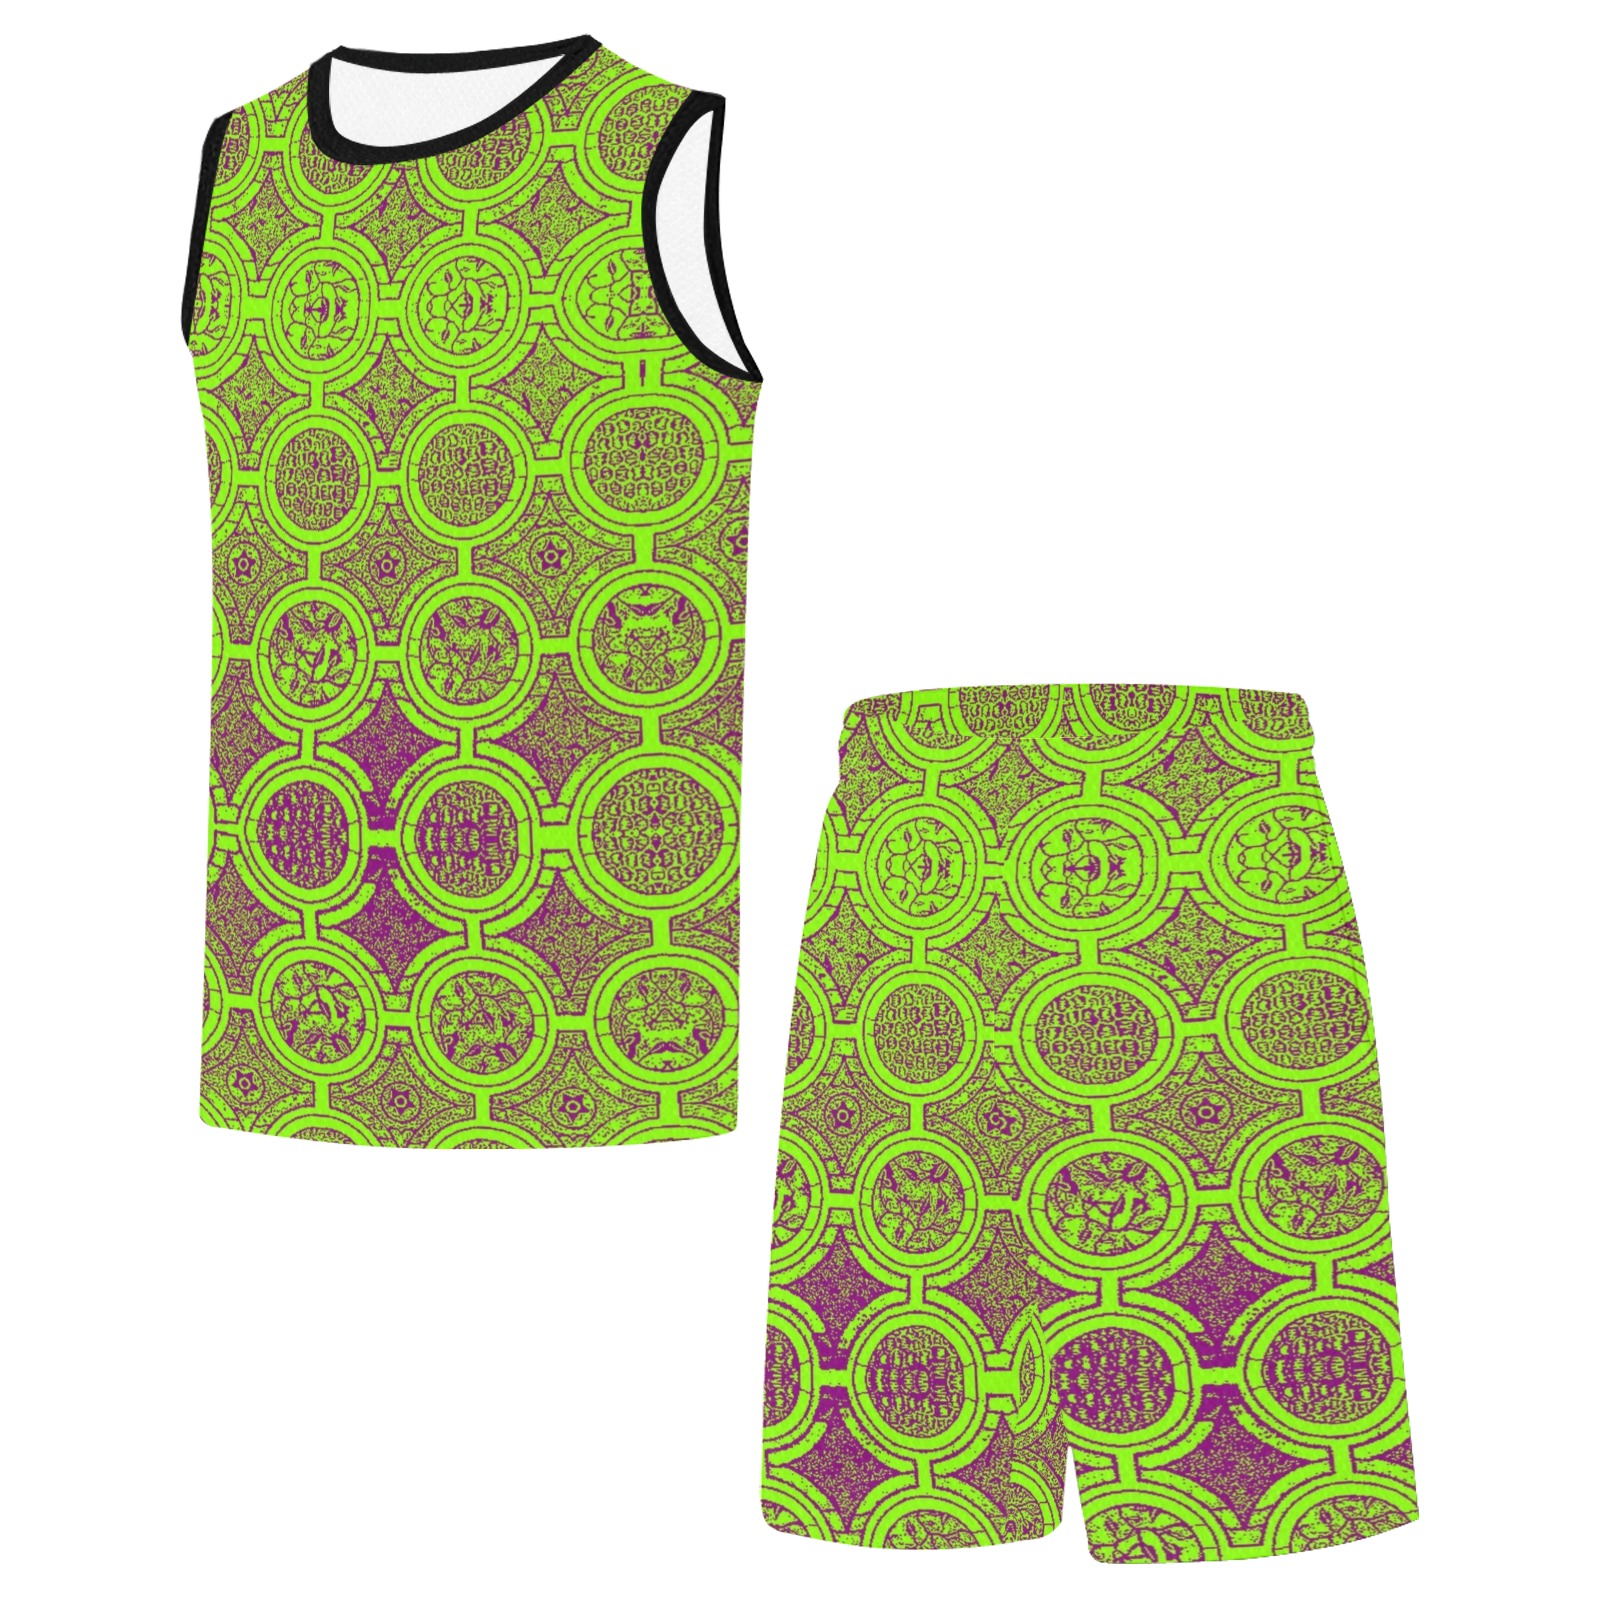 AFRICAN PRINT PATTERN 2 Basketball Uniform with Pocket